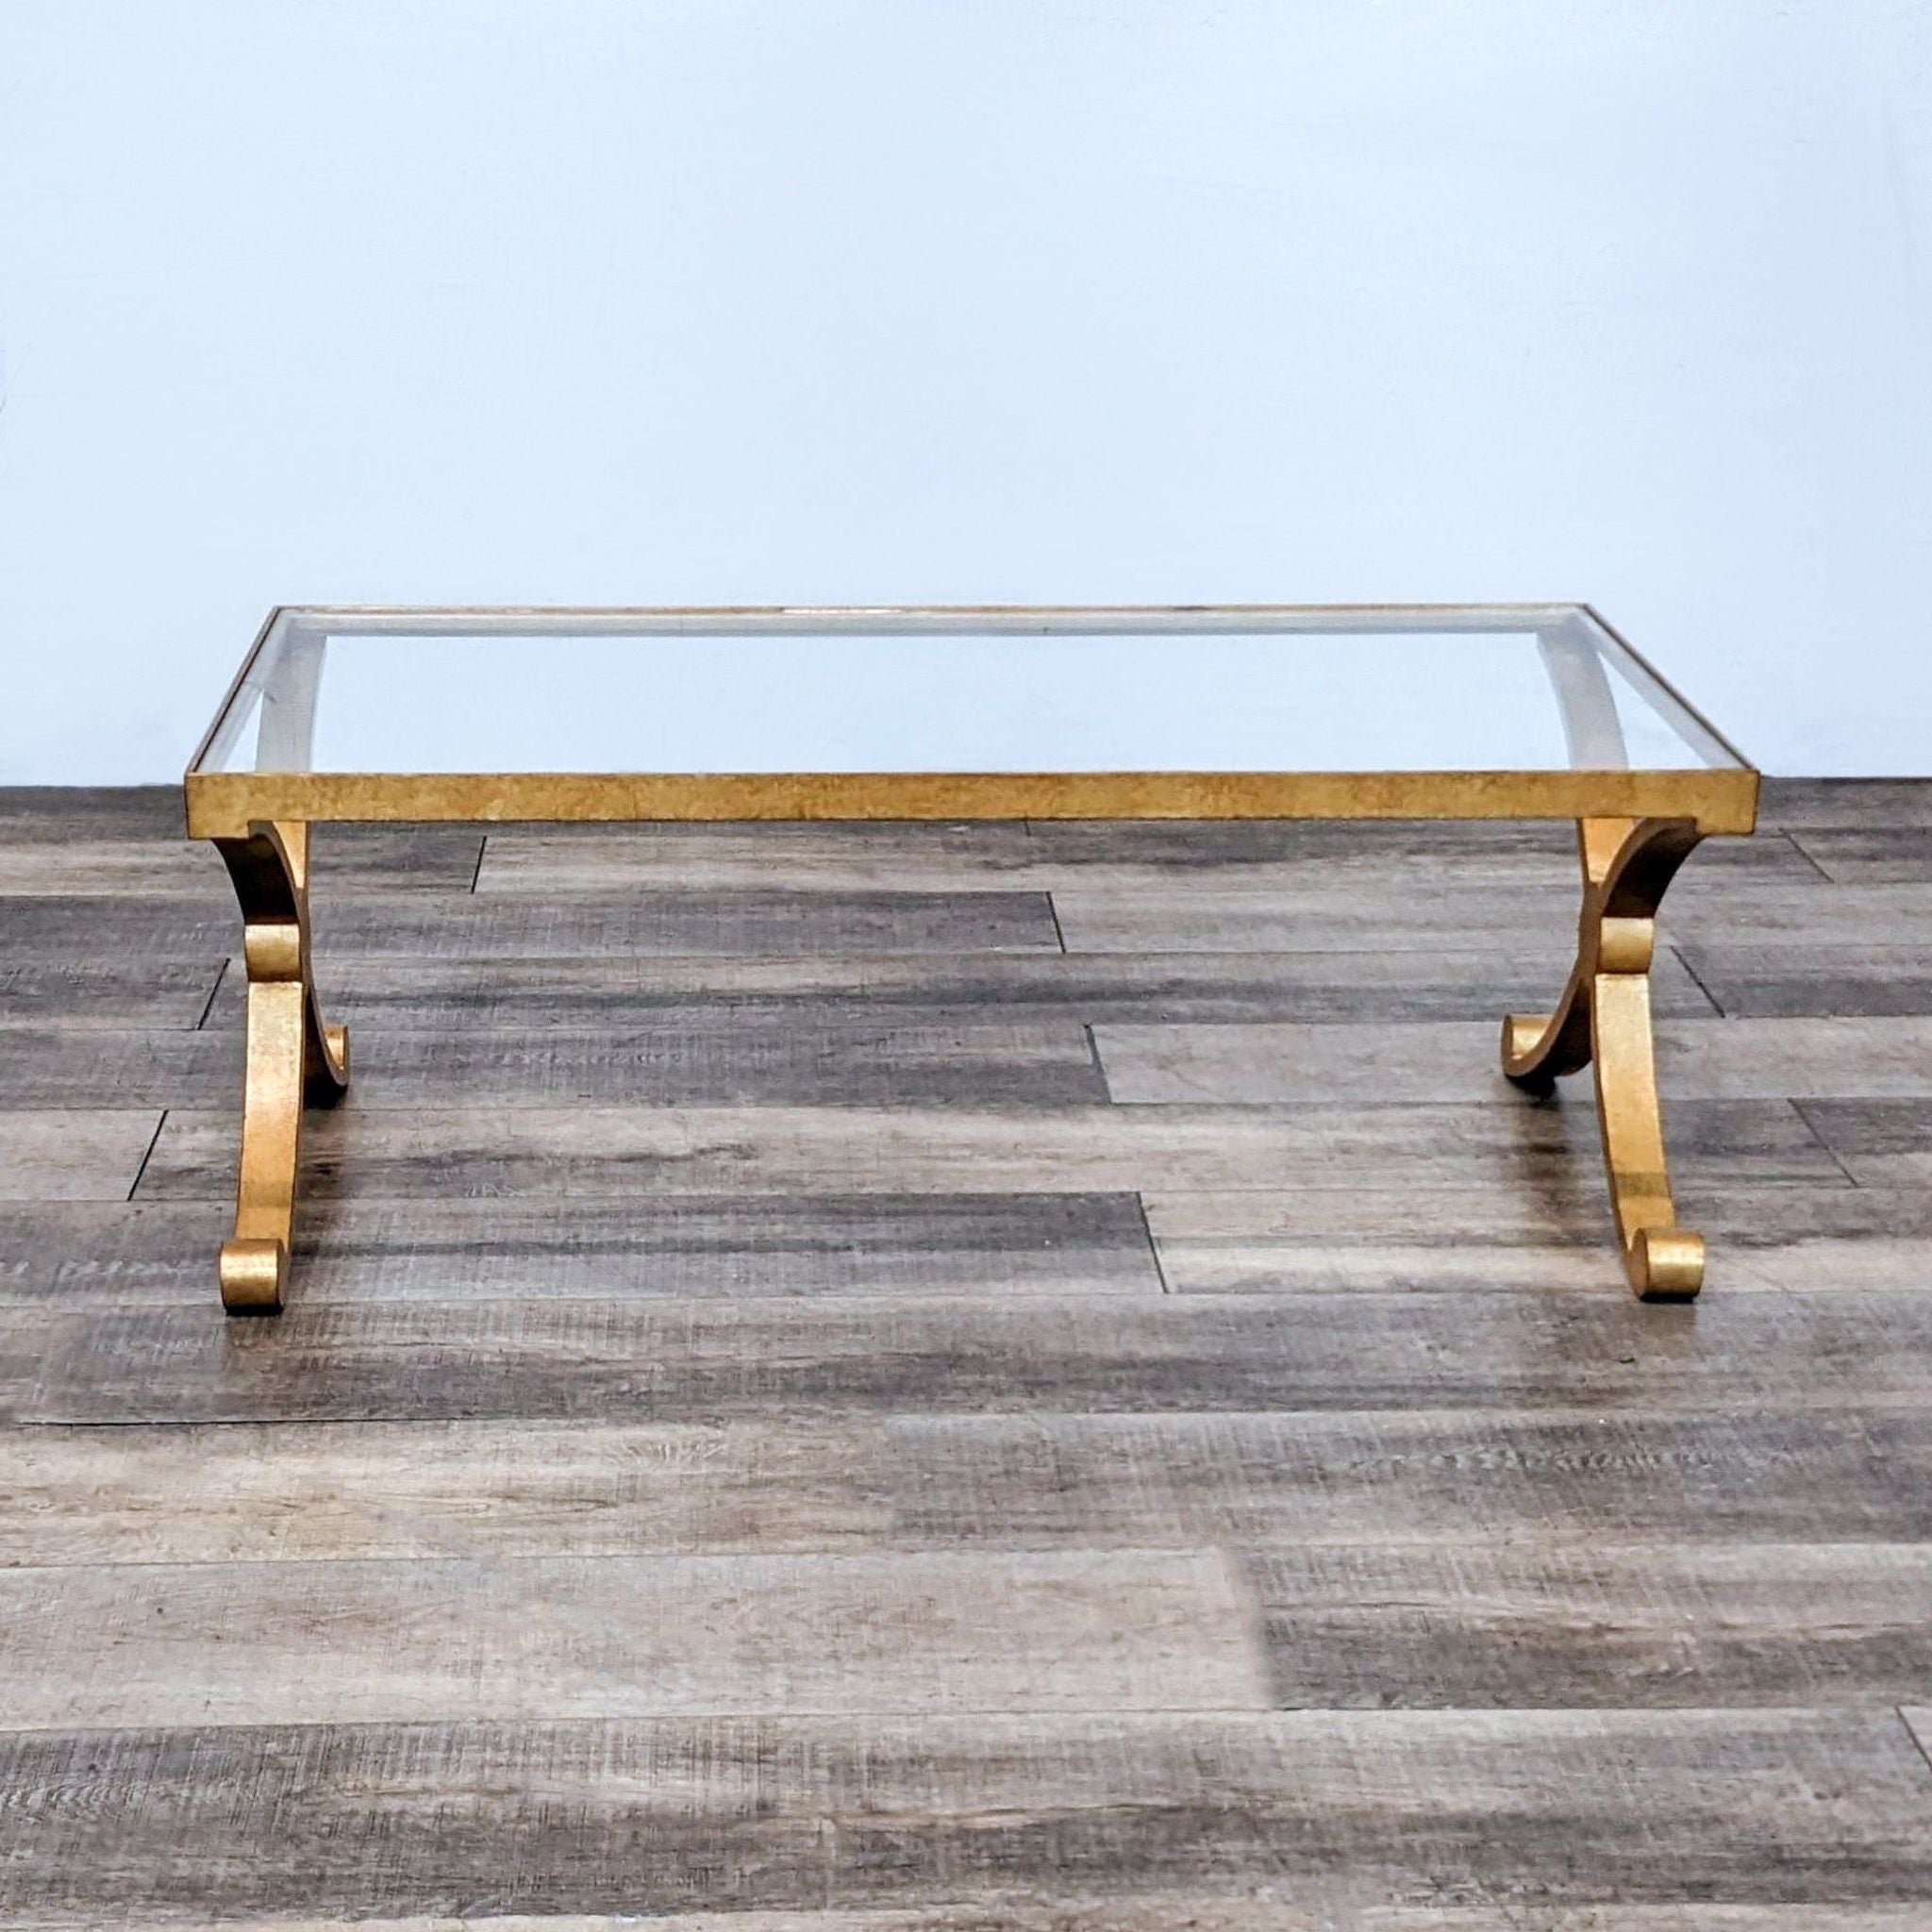 David Iatesta designer coffee table featuring a glass top and a structured gilt metal base, adding sophistication to any space.